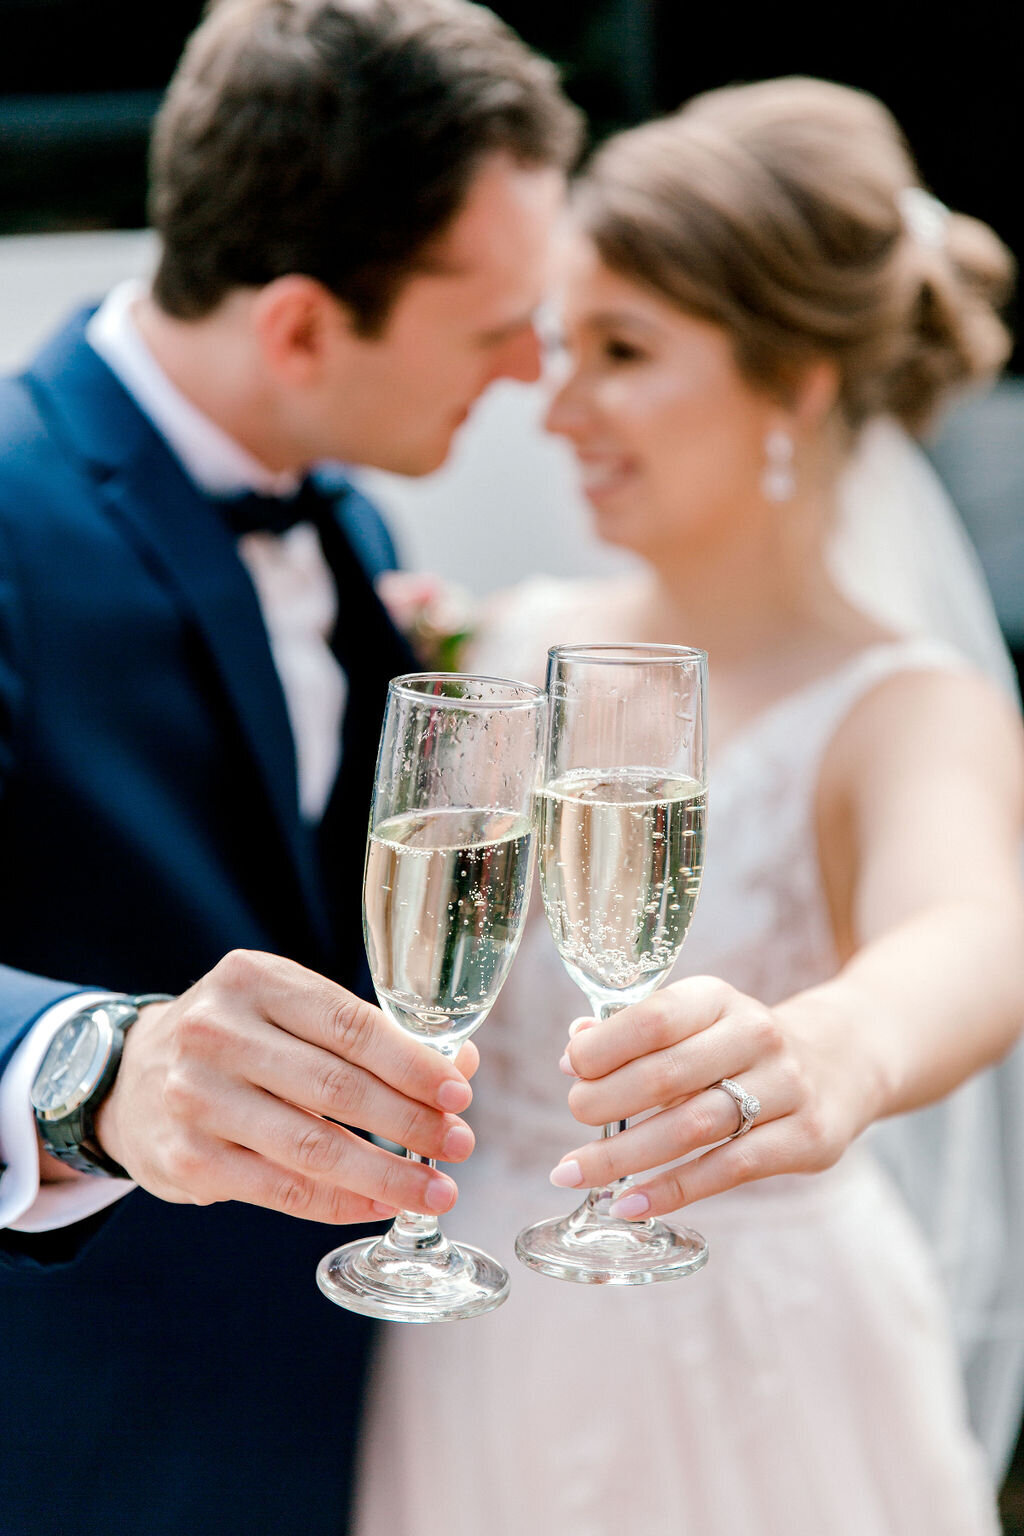 Joyful moment of the bride and groom raising a toast, a symbol of their celebration and shared happiness with loved ones.